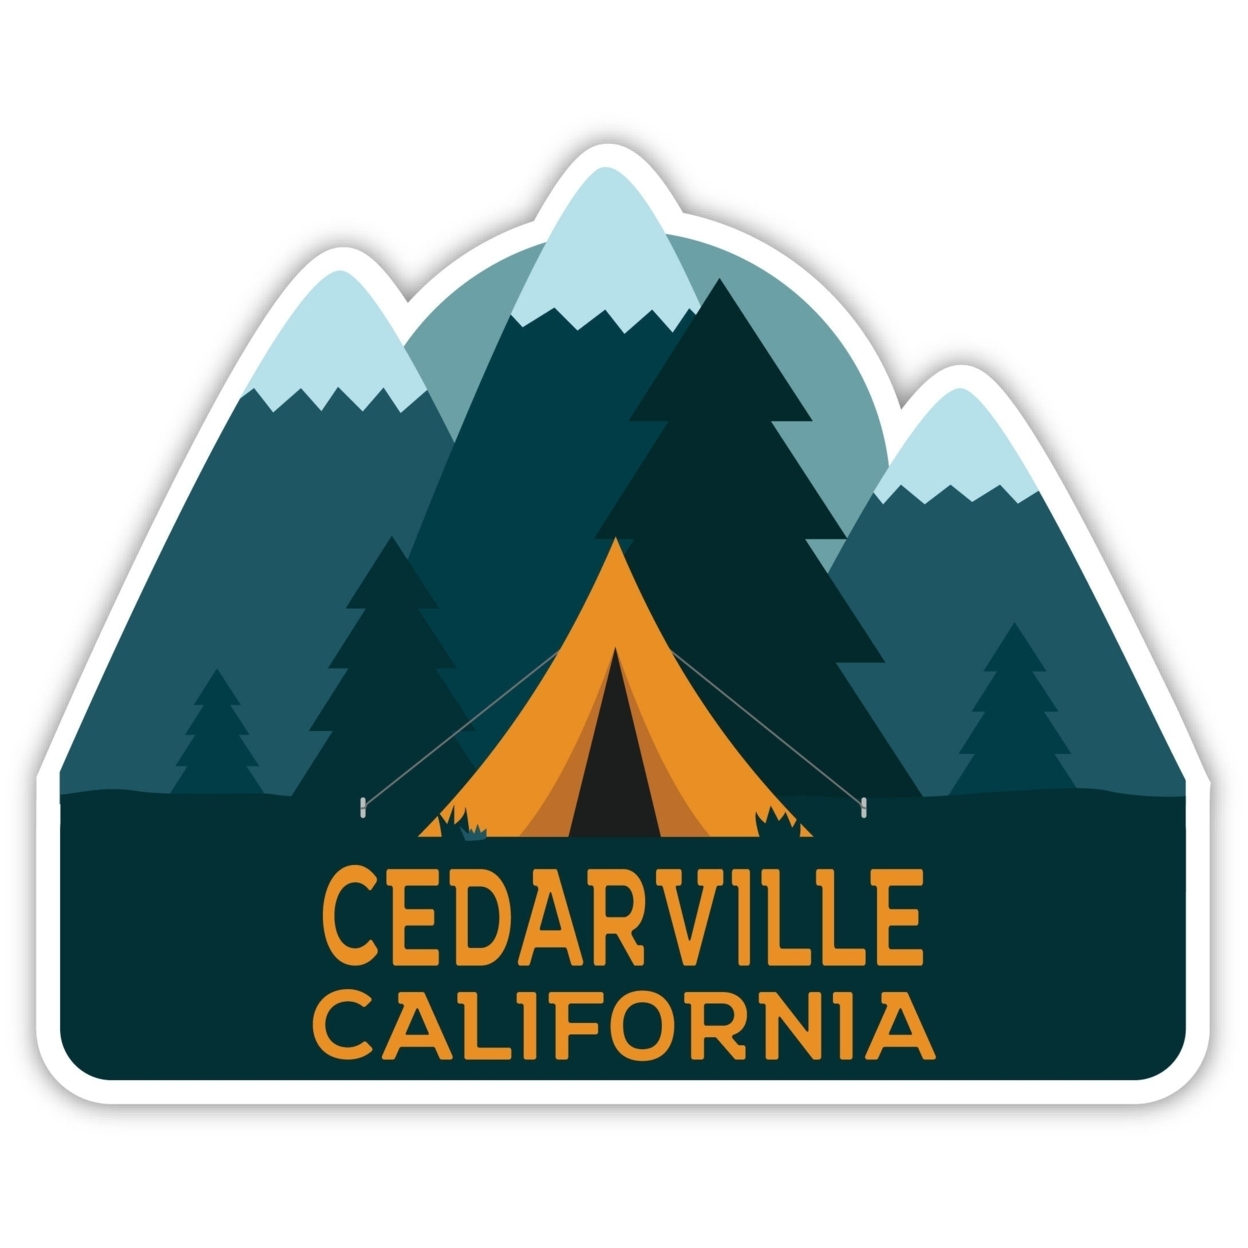 Cedarville California Souvenir Decorative Stickers (Choose Theme And Size) - 4-Pack, 12-Inch, Tent